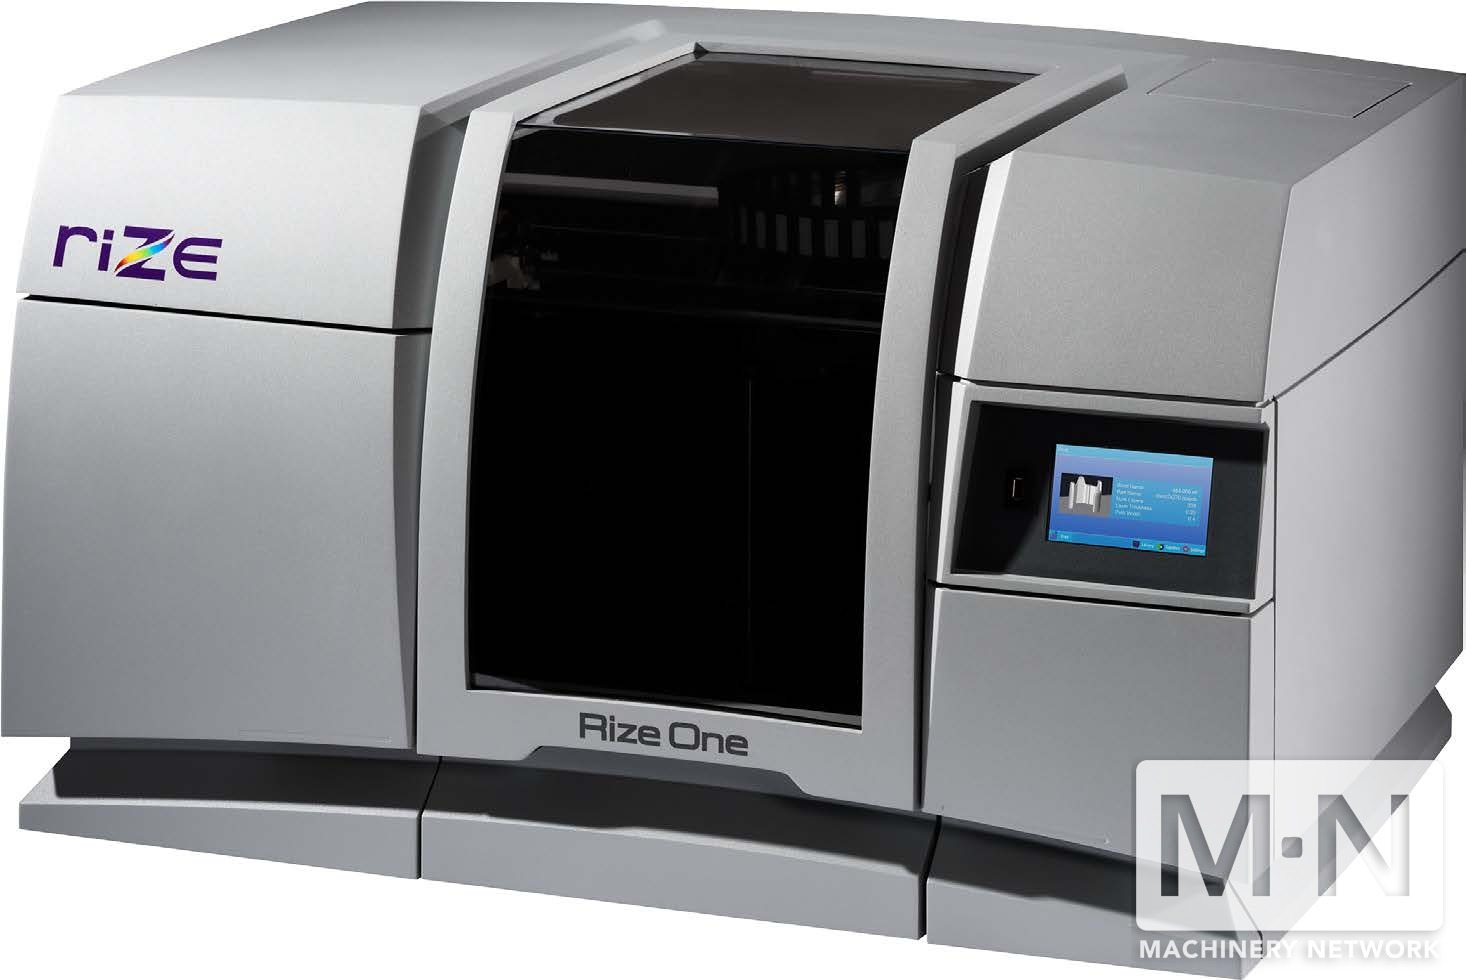 RIZE ONE 3D PRINTERS | Machinery Network Inc.